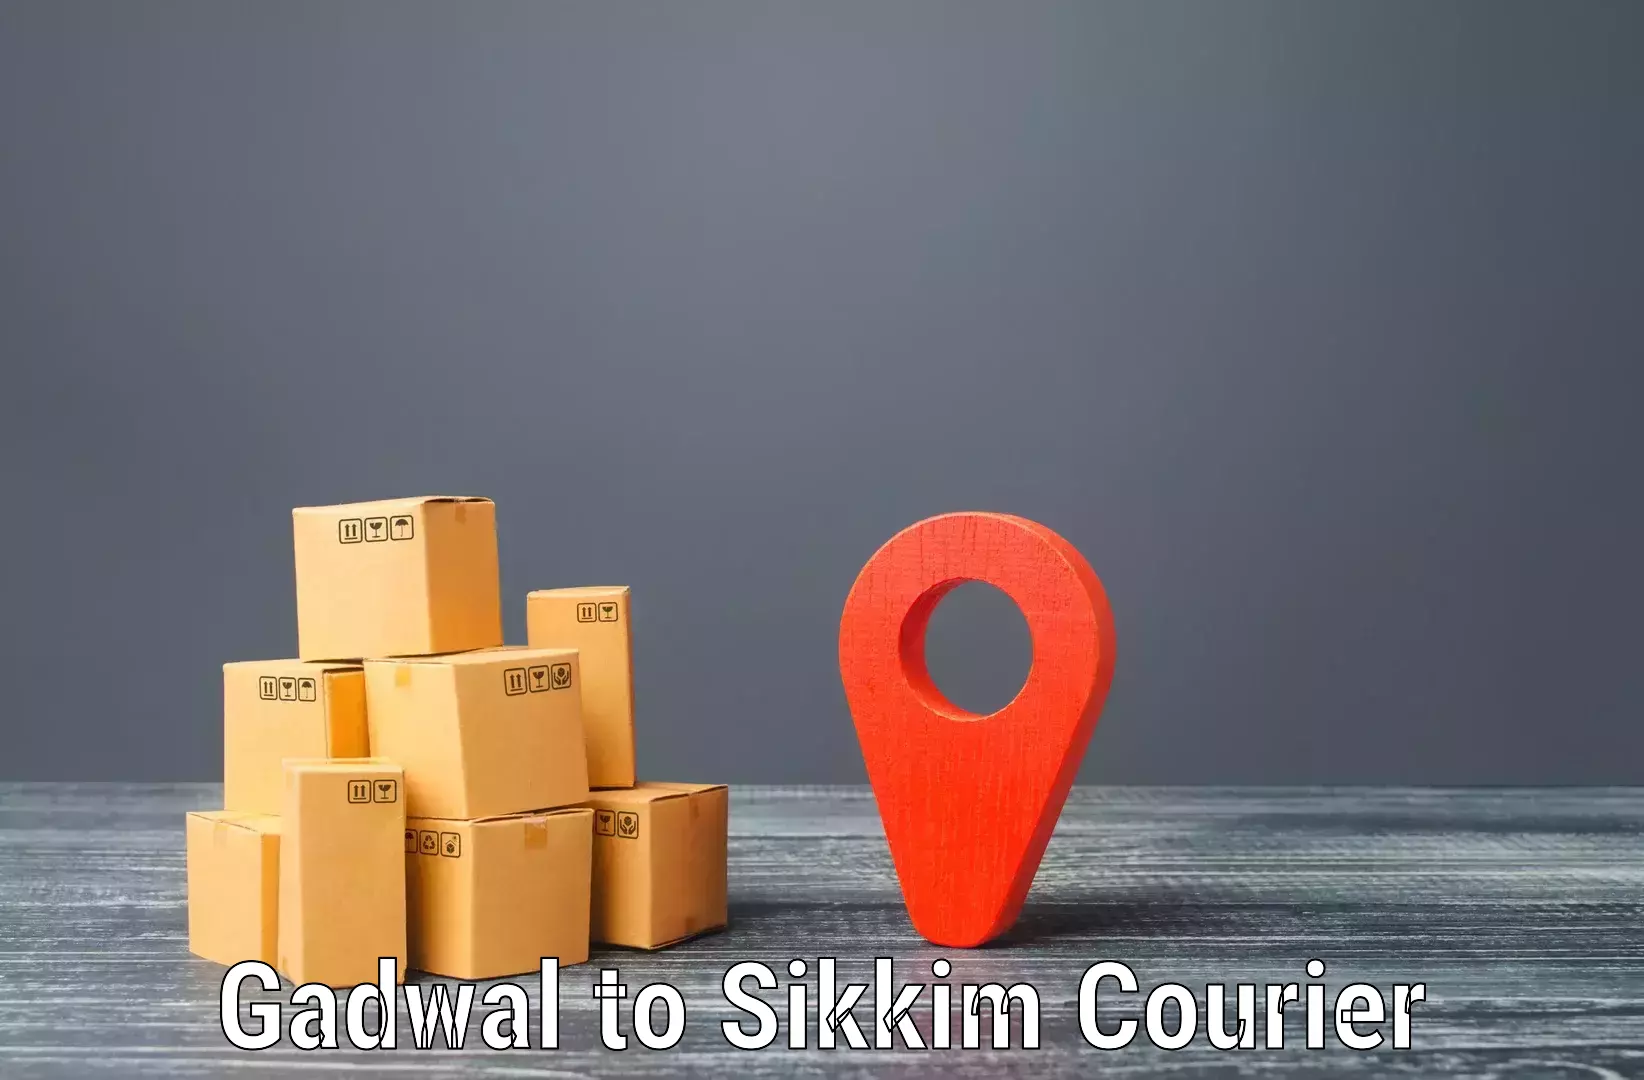 Large-scale shipping solutions Gadwal to Sikkim